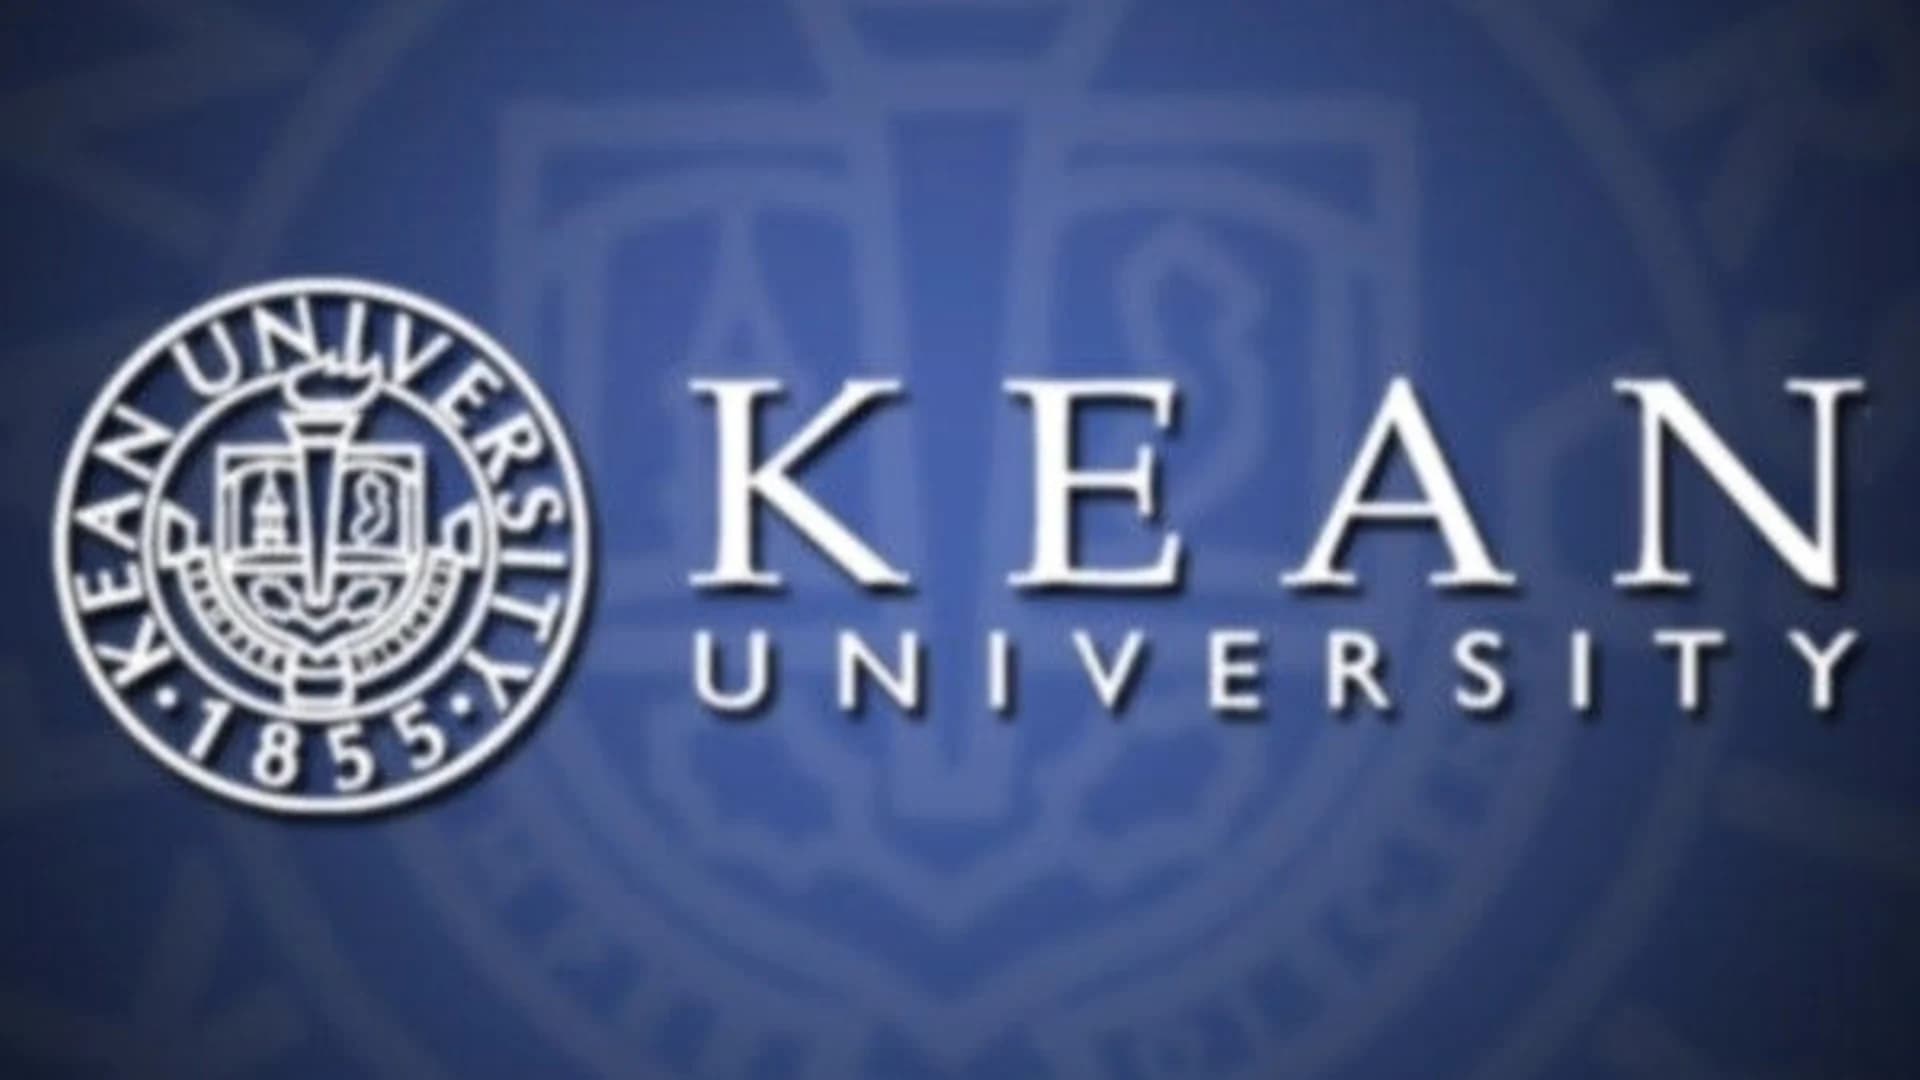 Police: No threat following suspicious package at Kean University